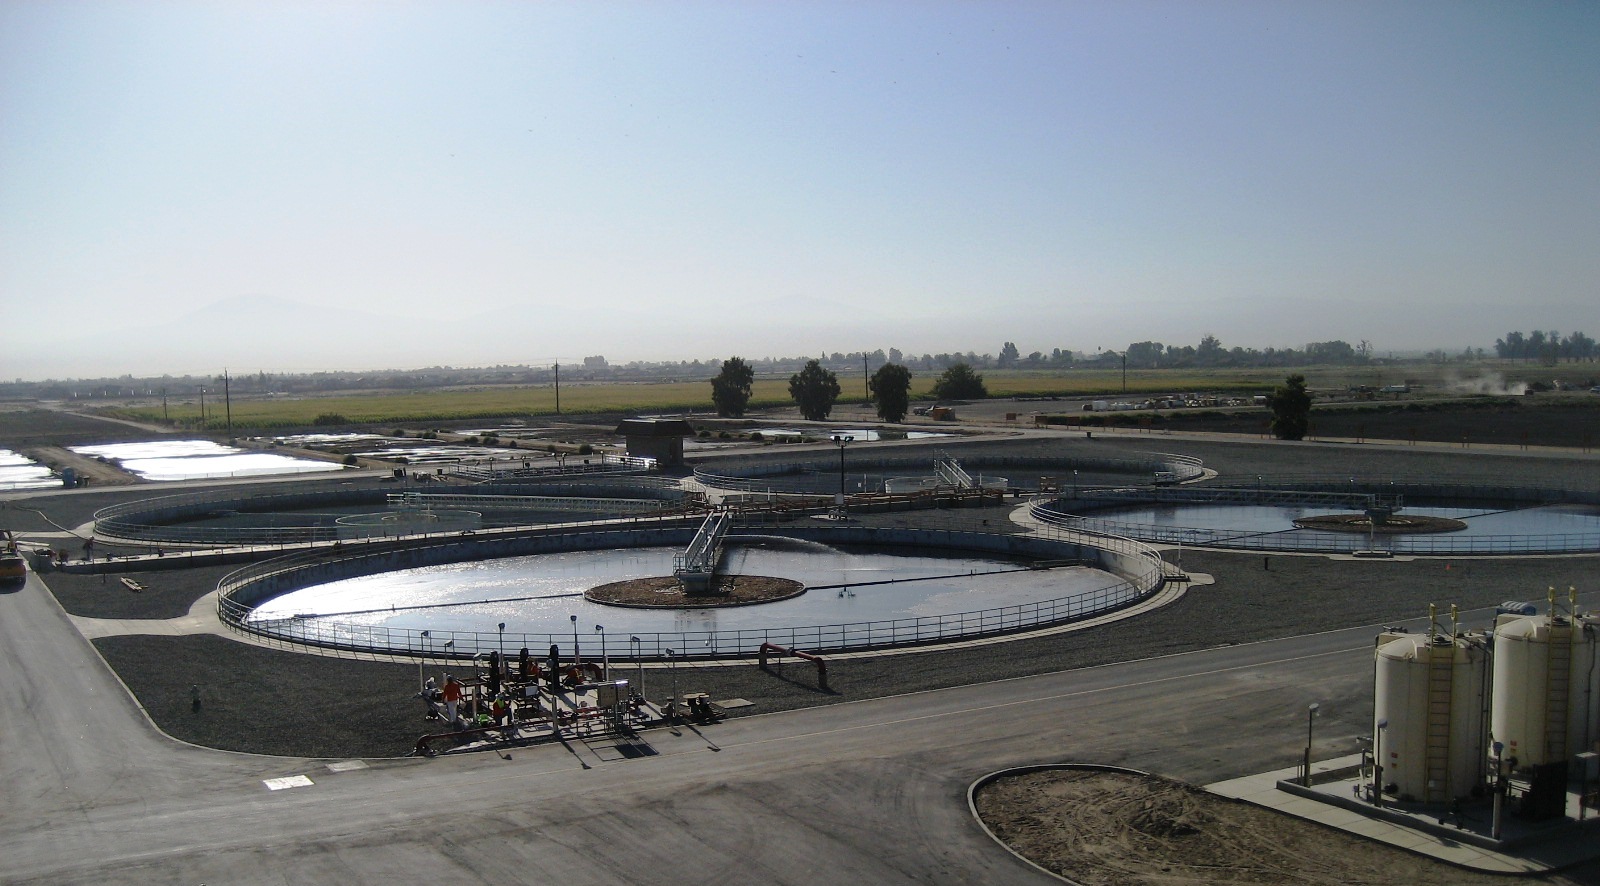 Bakersfield Wastewater Treatment Plant Number 3